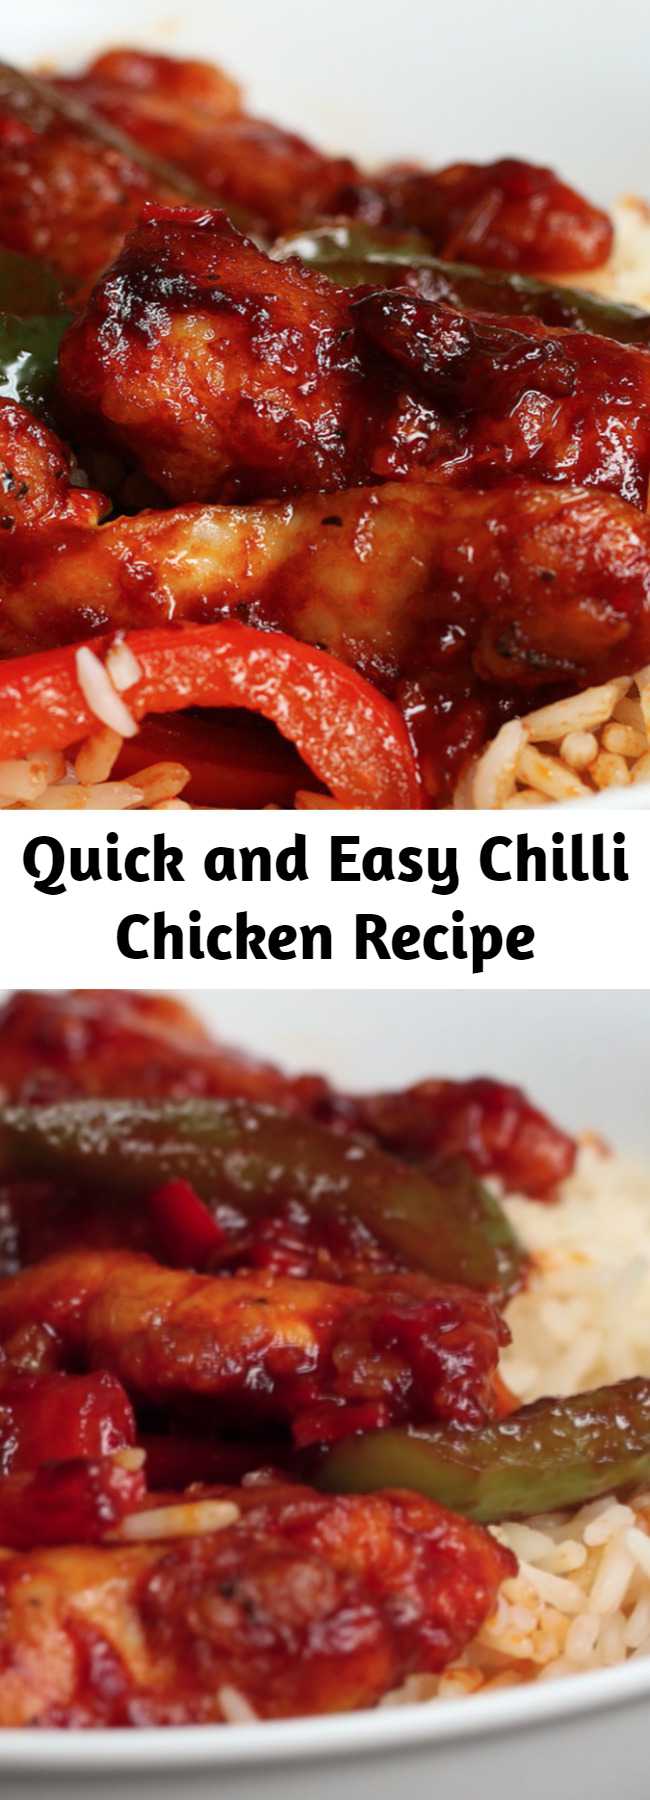 Quick and Easy Chilli Chicken Recipe - Nicer than takeaway Chinese, so good especially with sweet chilli sauce.